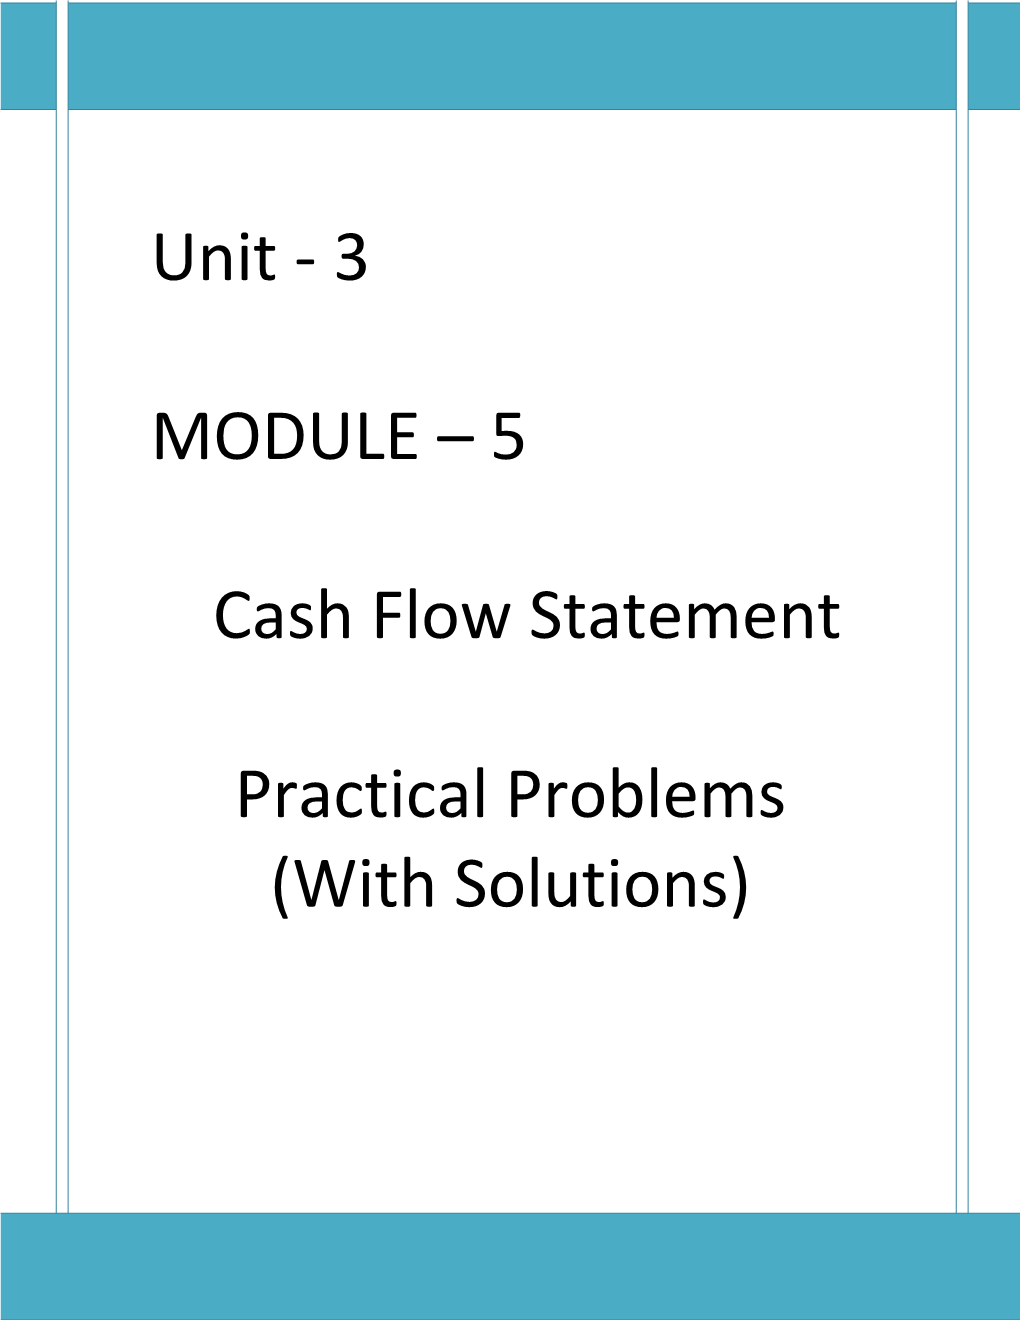 5 Cash Flow Statement Practical Problems (With Solutions)